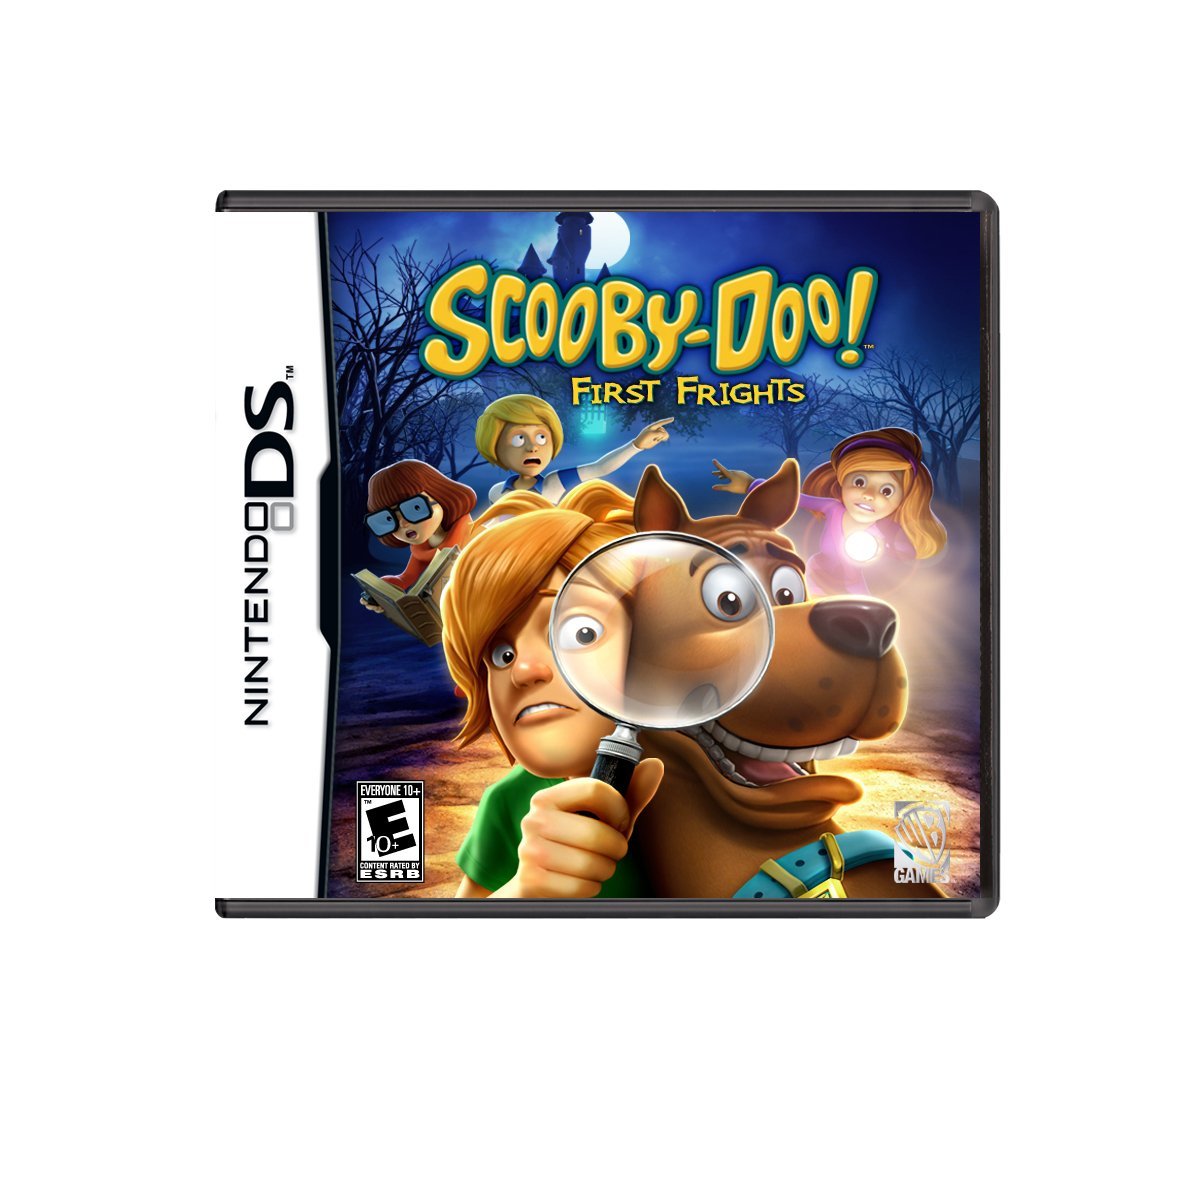 Scooby Doo! First Frights NDS (Renewed)